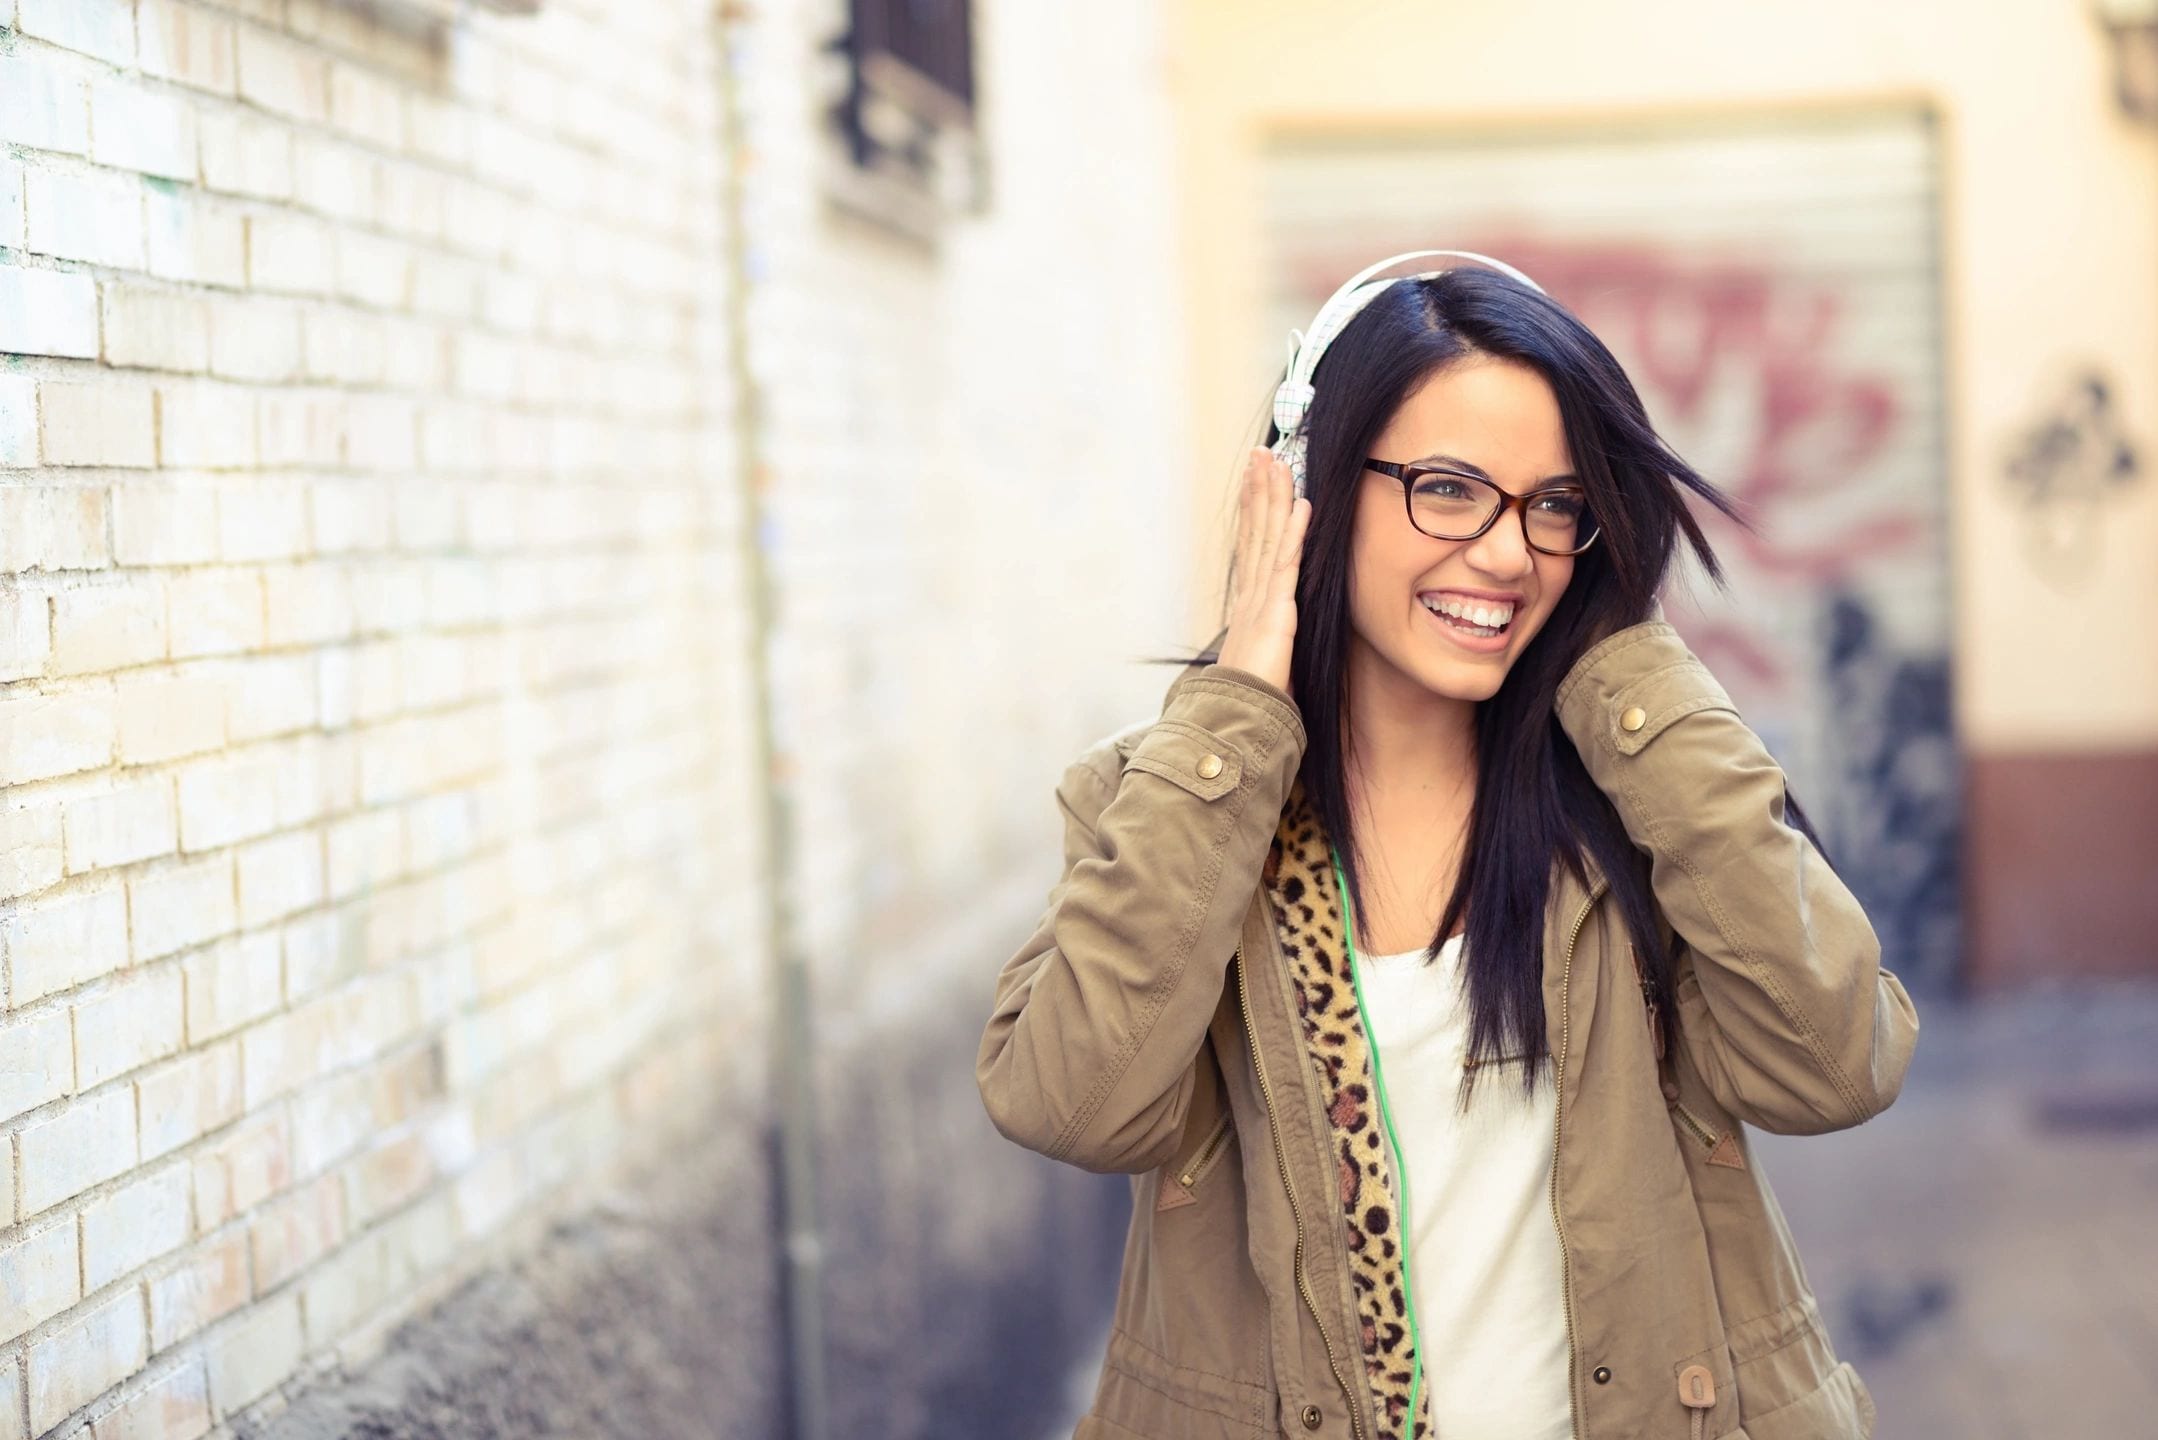 A woman with glasses and headphones is smiling.